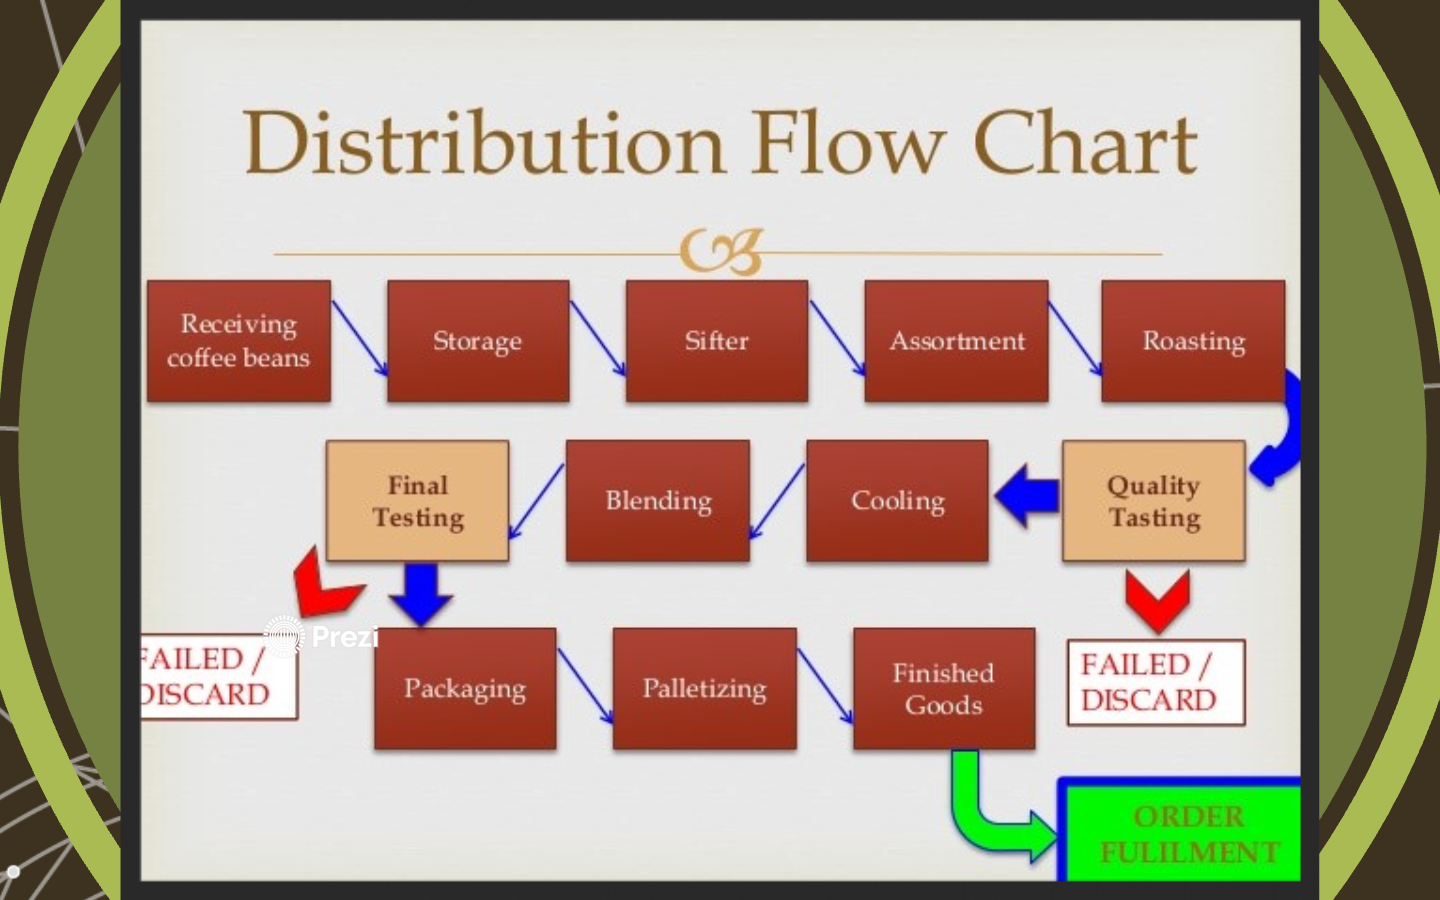 istribution Flow Chart Receiving Storage coffee beans Final Tes